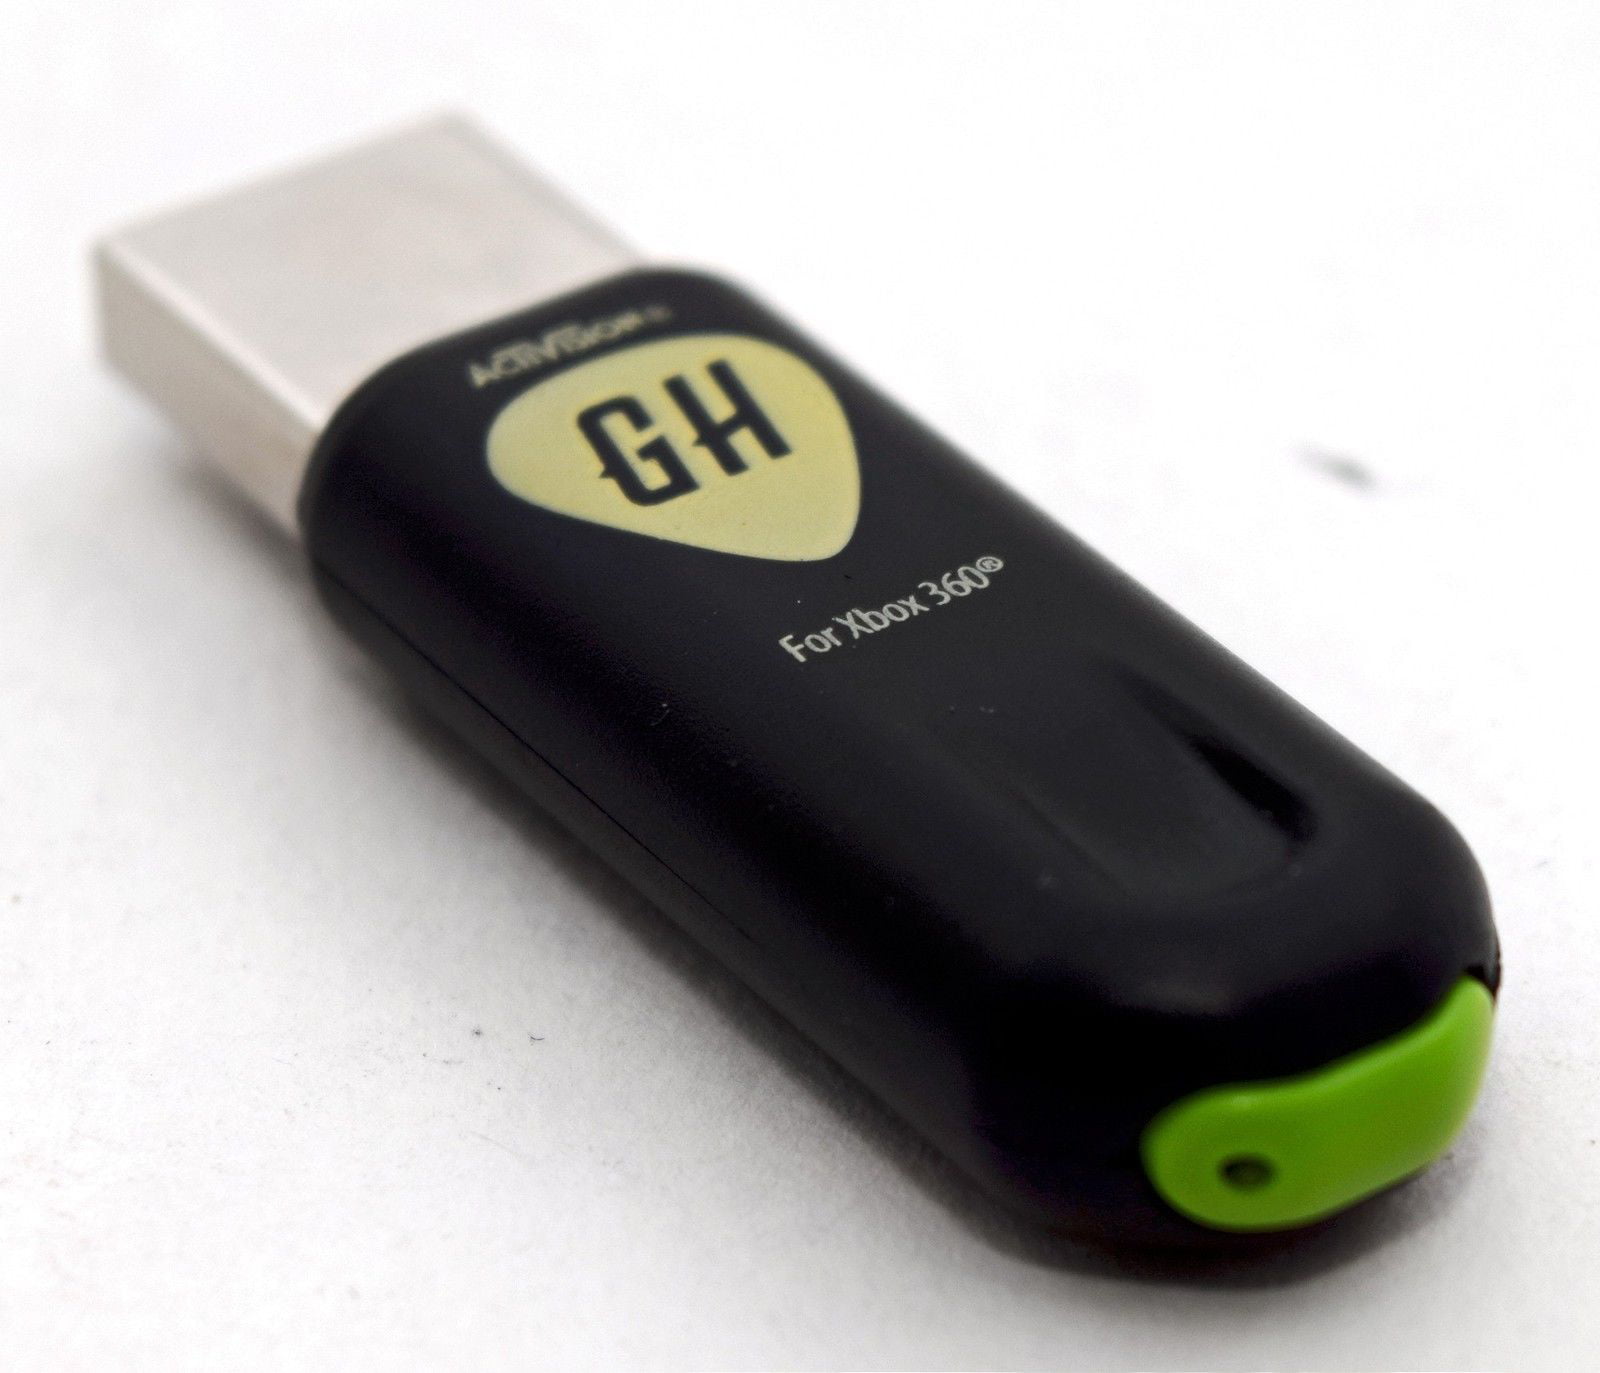 New Xbox 360 Guitar Hero Live Usb Dongle Receiver Only Wireless Adapter Sync Oem